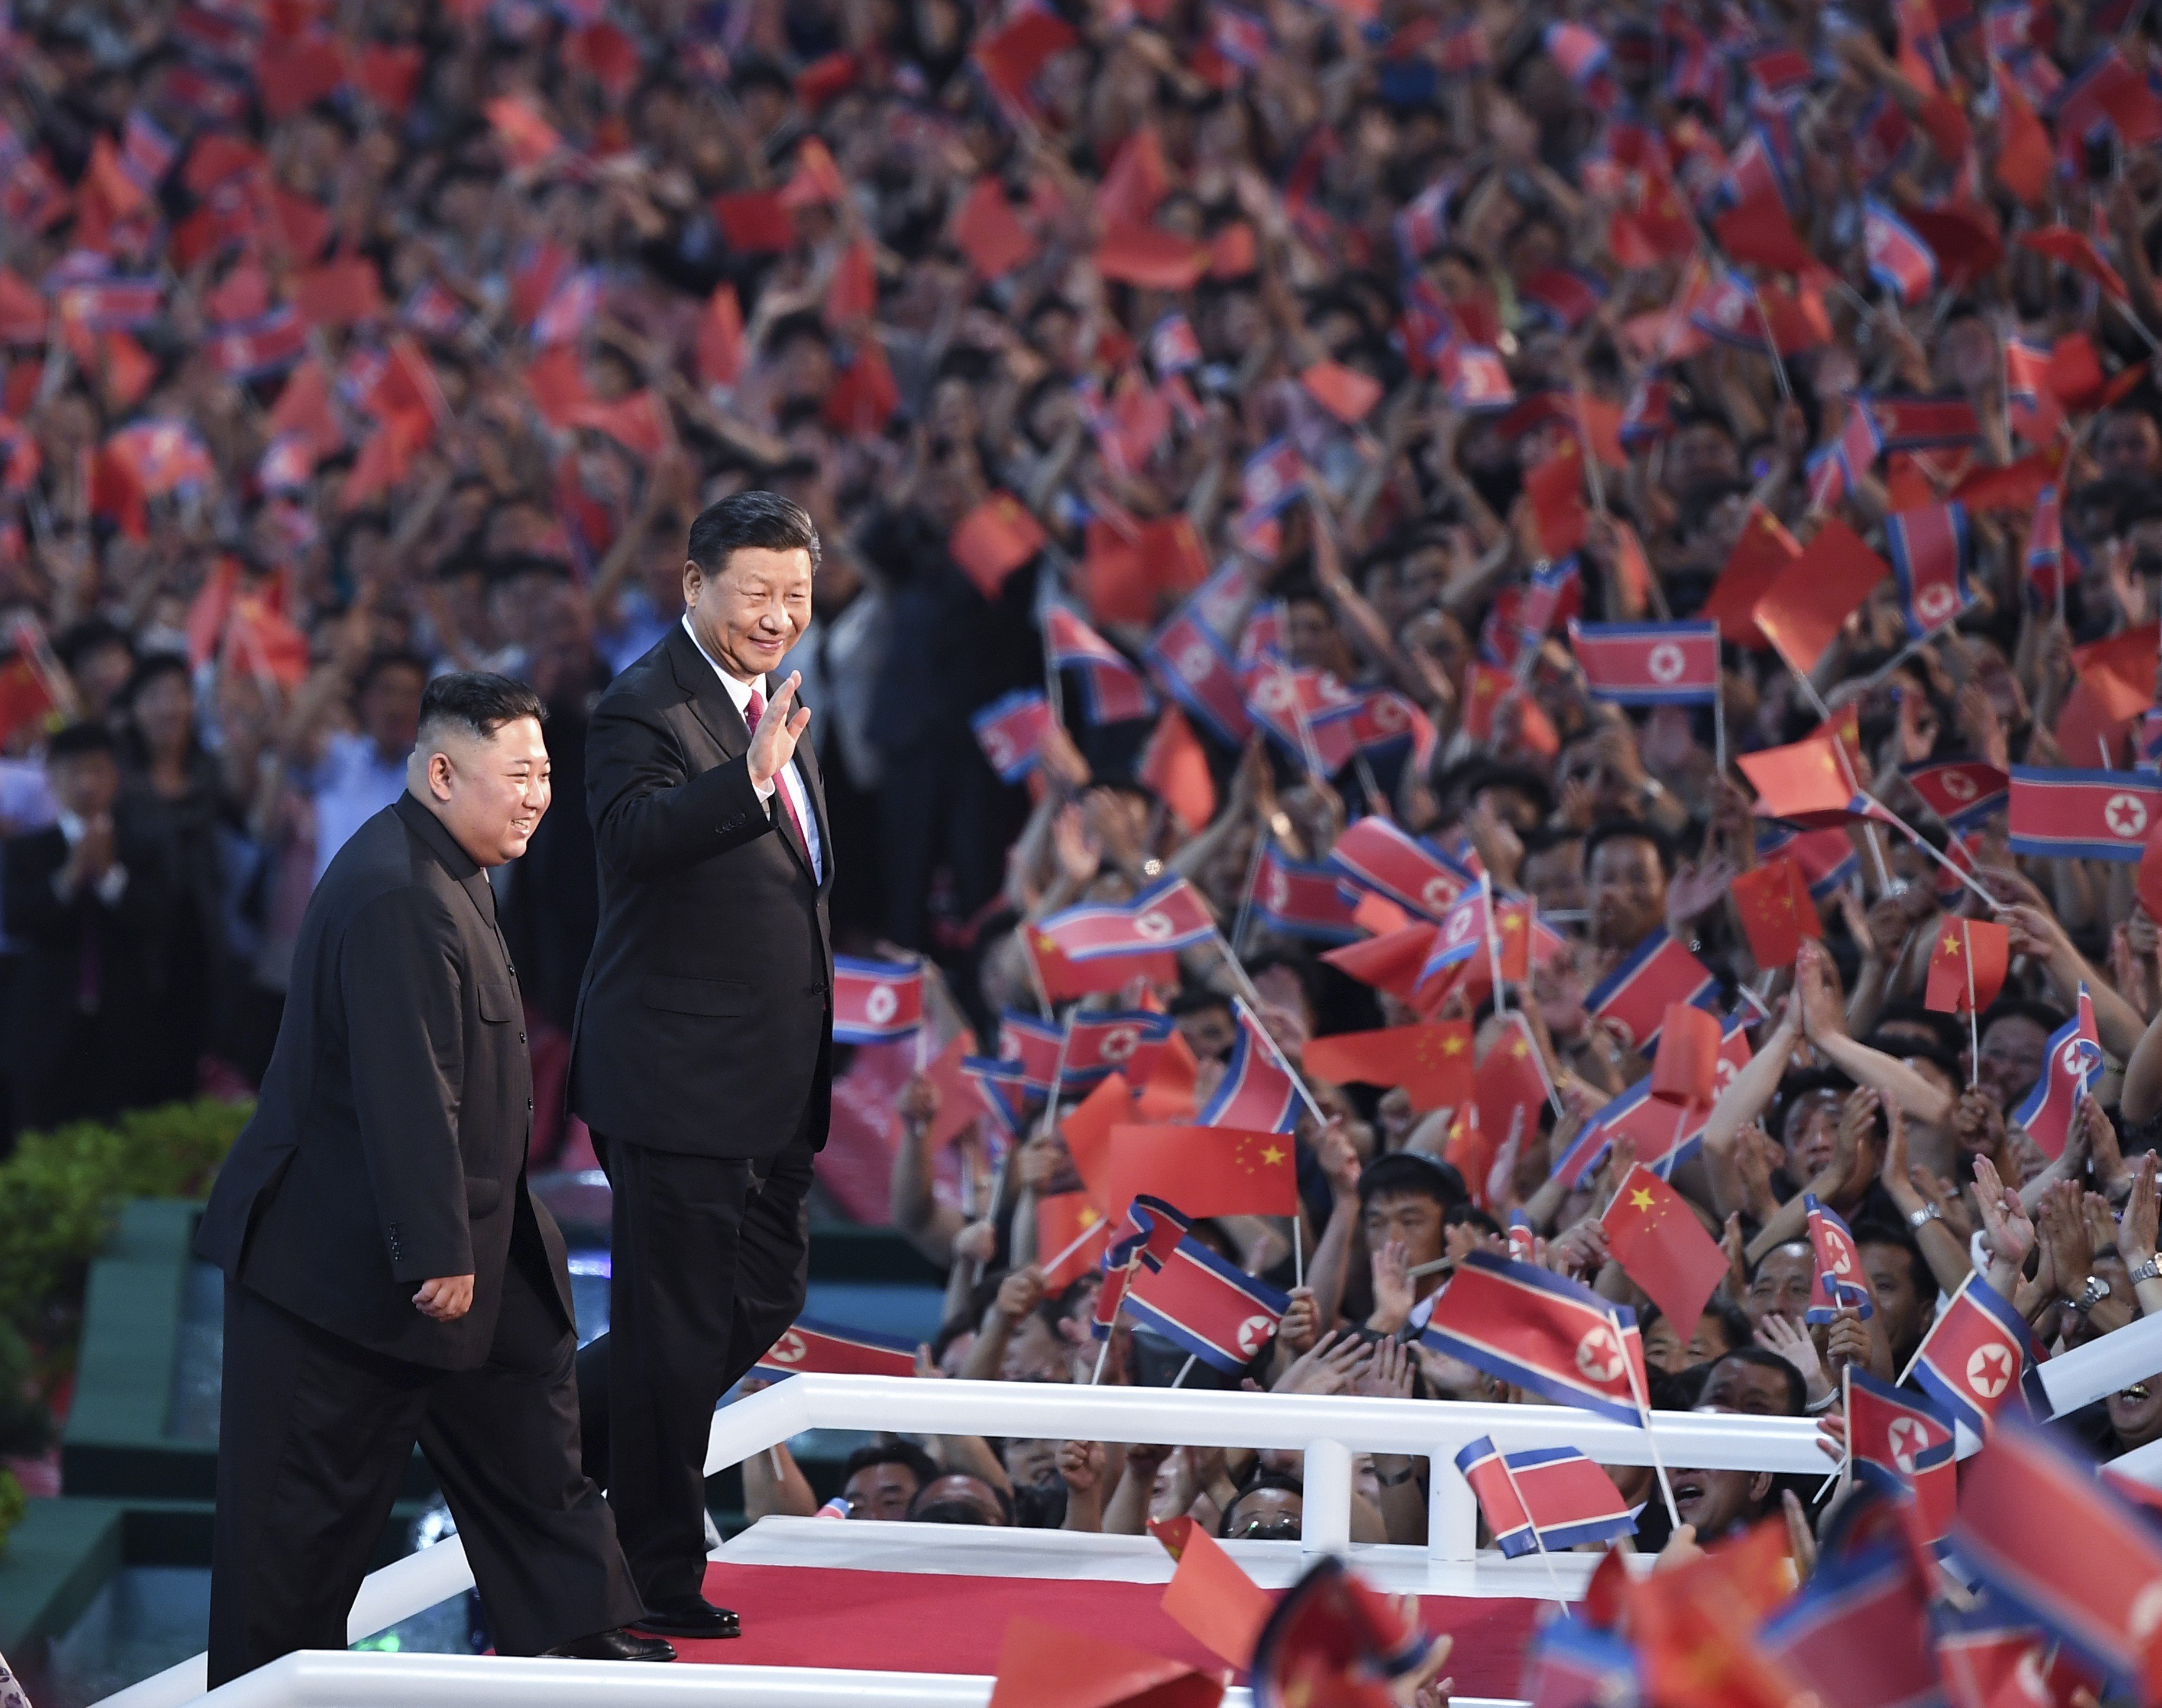 Chinese President Xi Jinping and North Korean leader Kim Jong-un greet the crowds at a performance at the May Day Stadium in Pyongyang on June 20. Beijing’s mediation of nuclear talks would help promote its status as a responsible power on the world stage. Photo: Xinhua